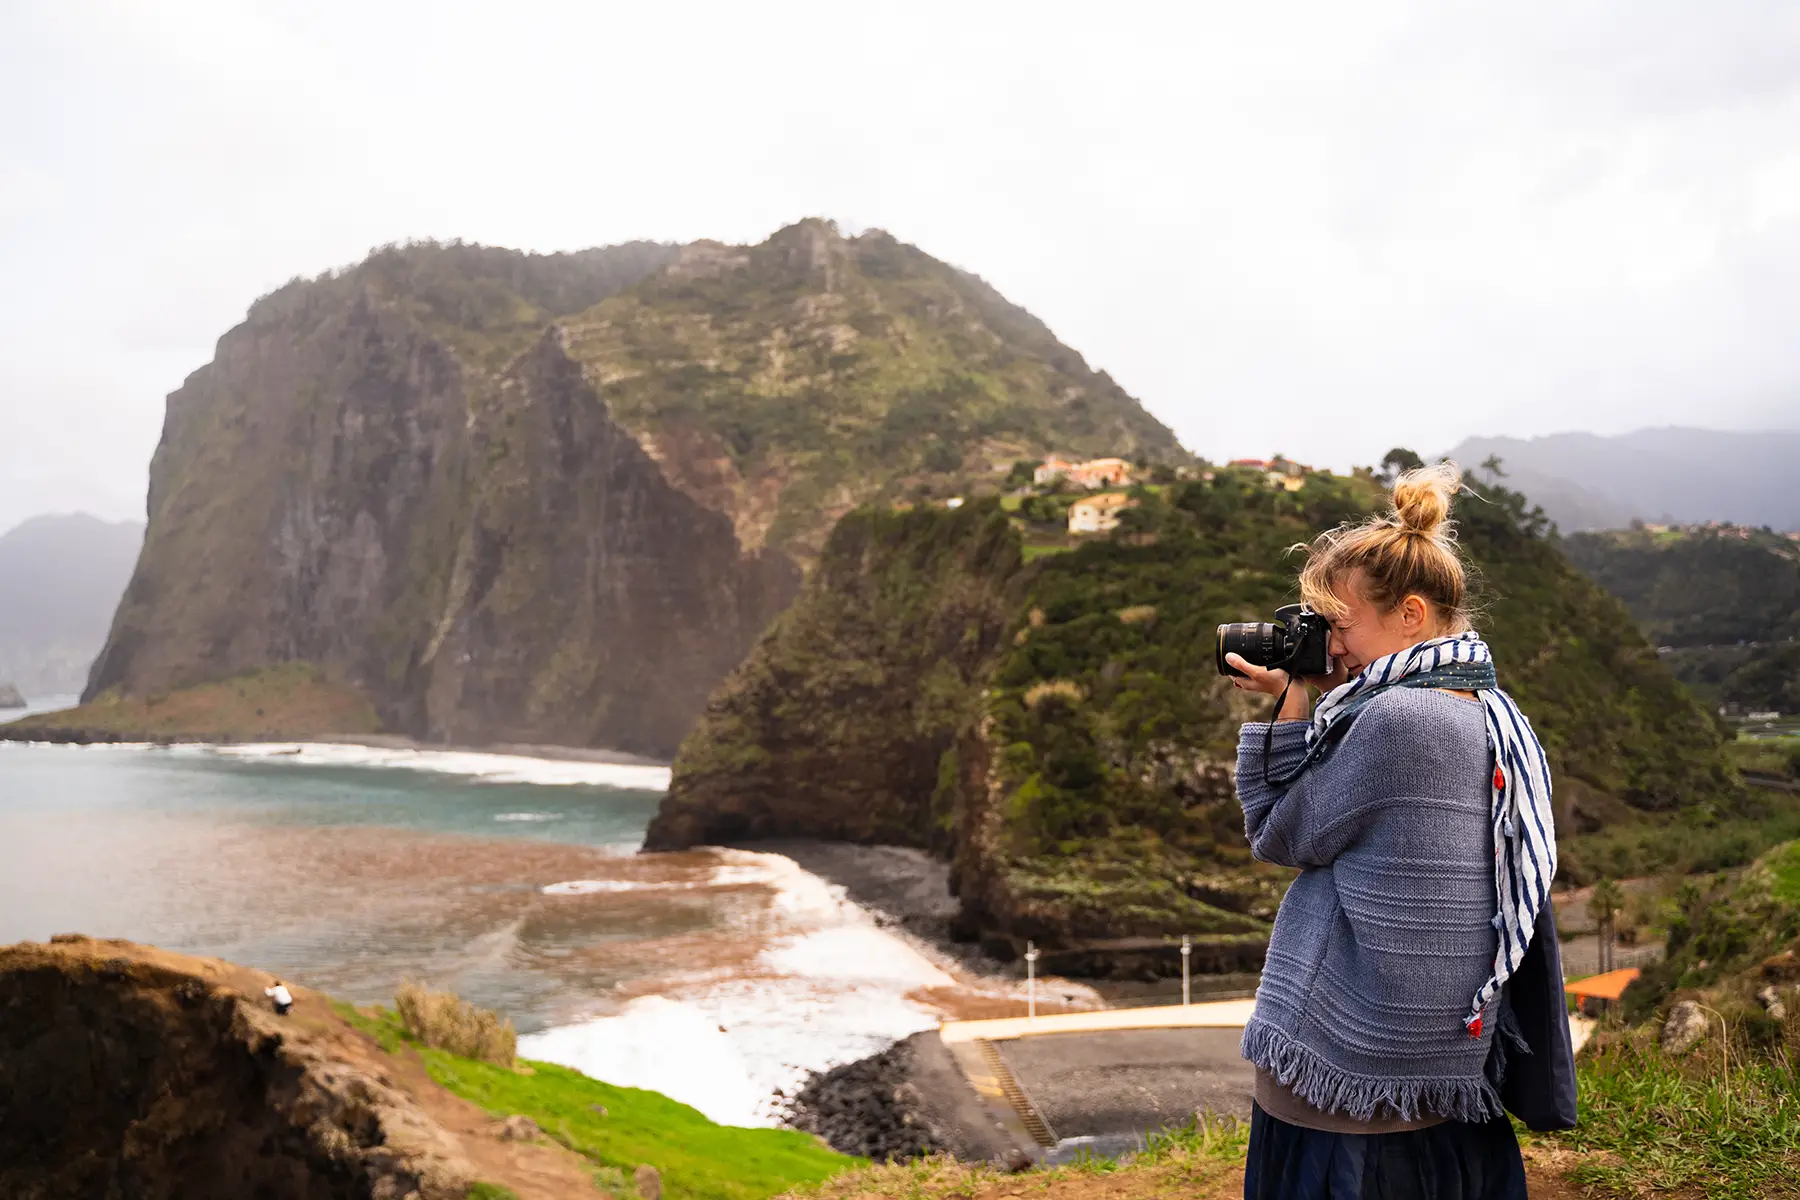 A woman taking a picture on the Portuguese coast, lots of green hills, cliffs, and sea.